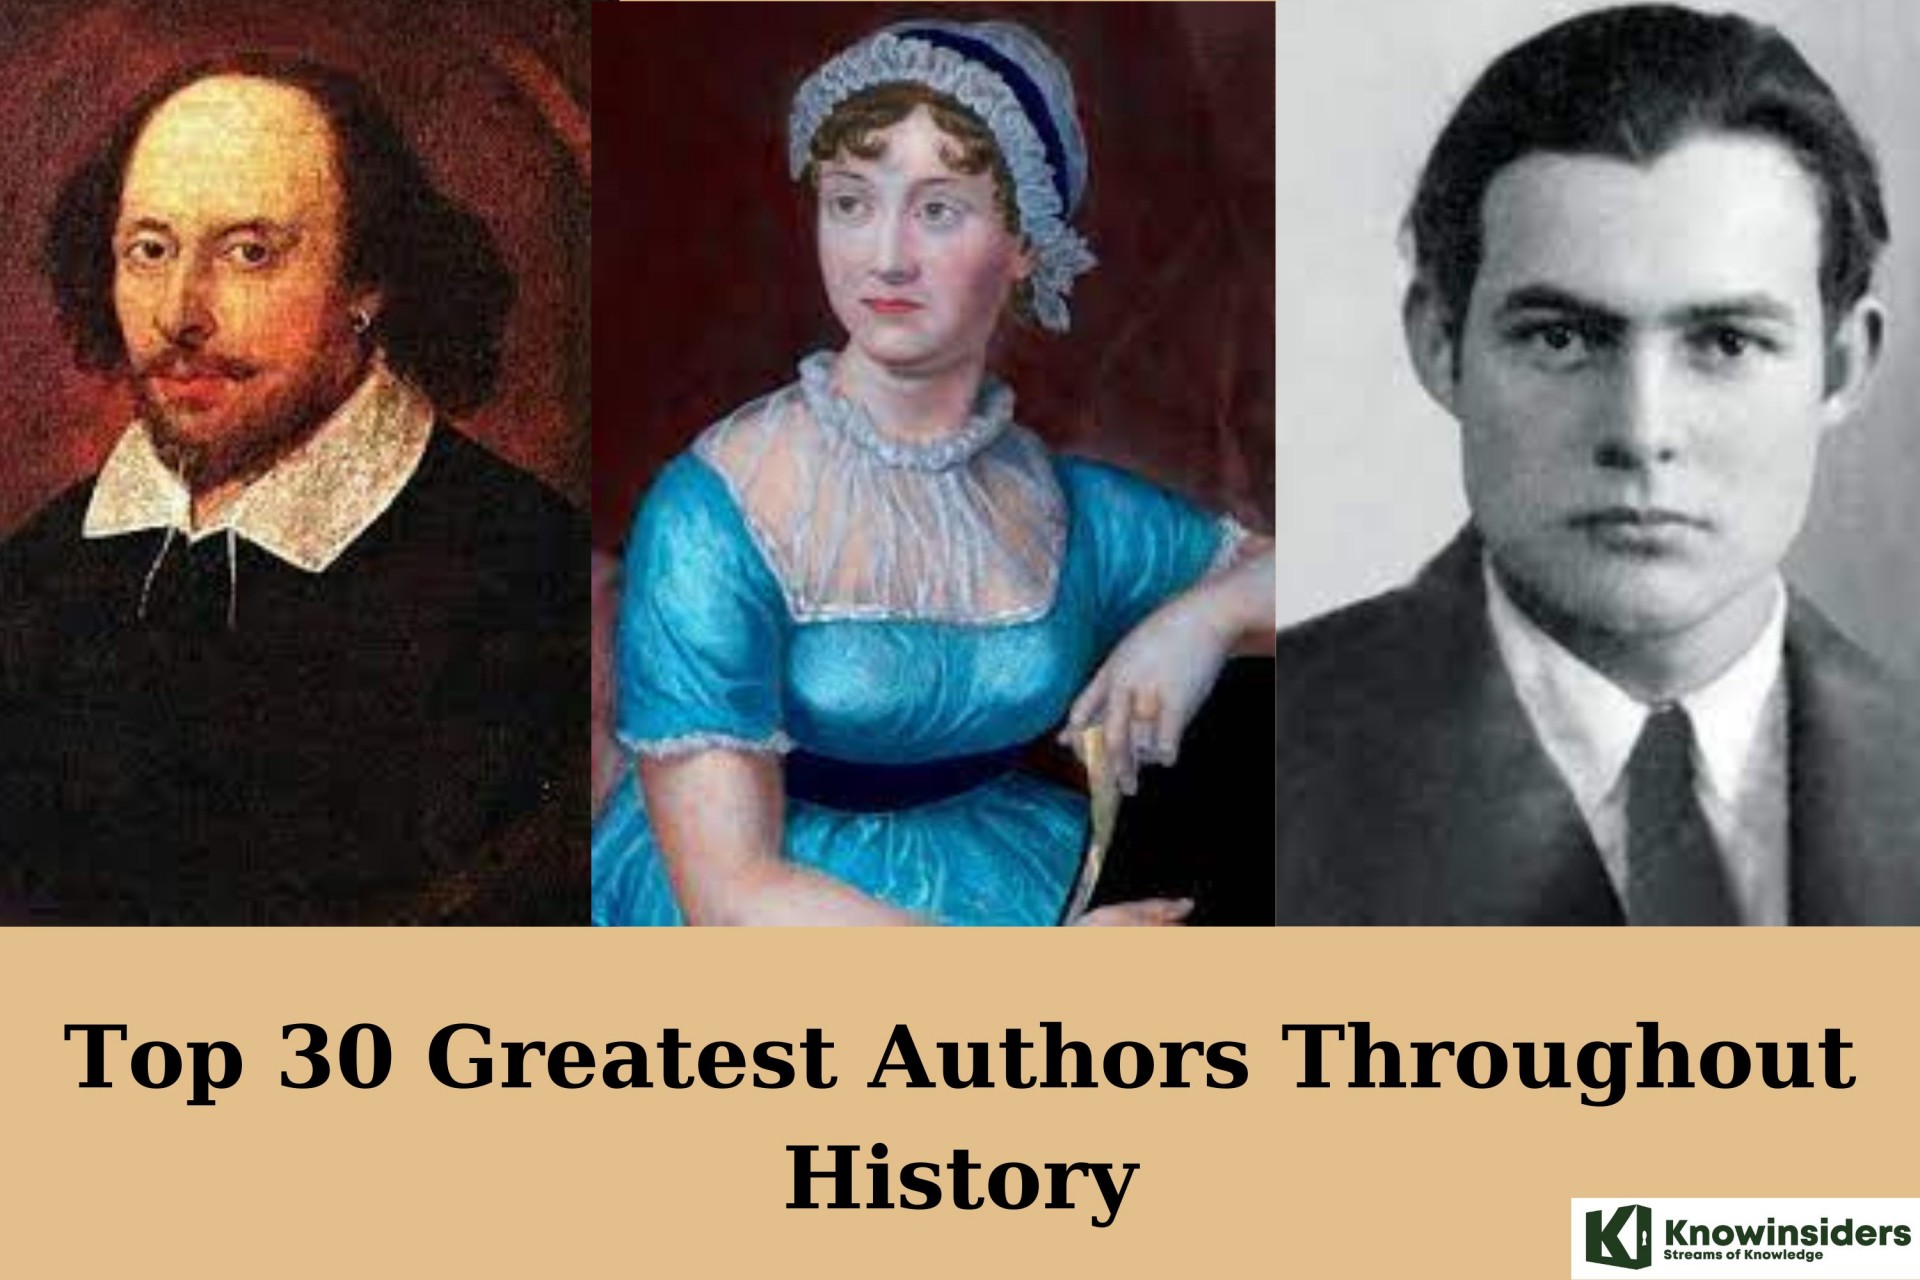 Top 30 Greatest Authors Throughout History